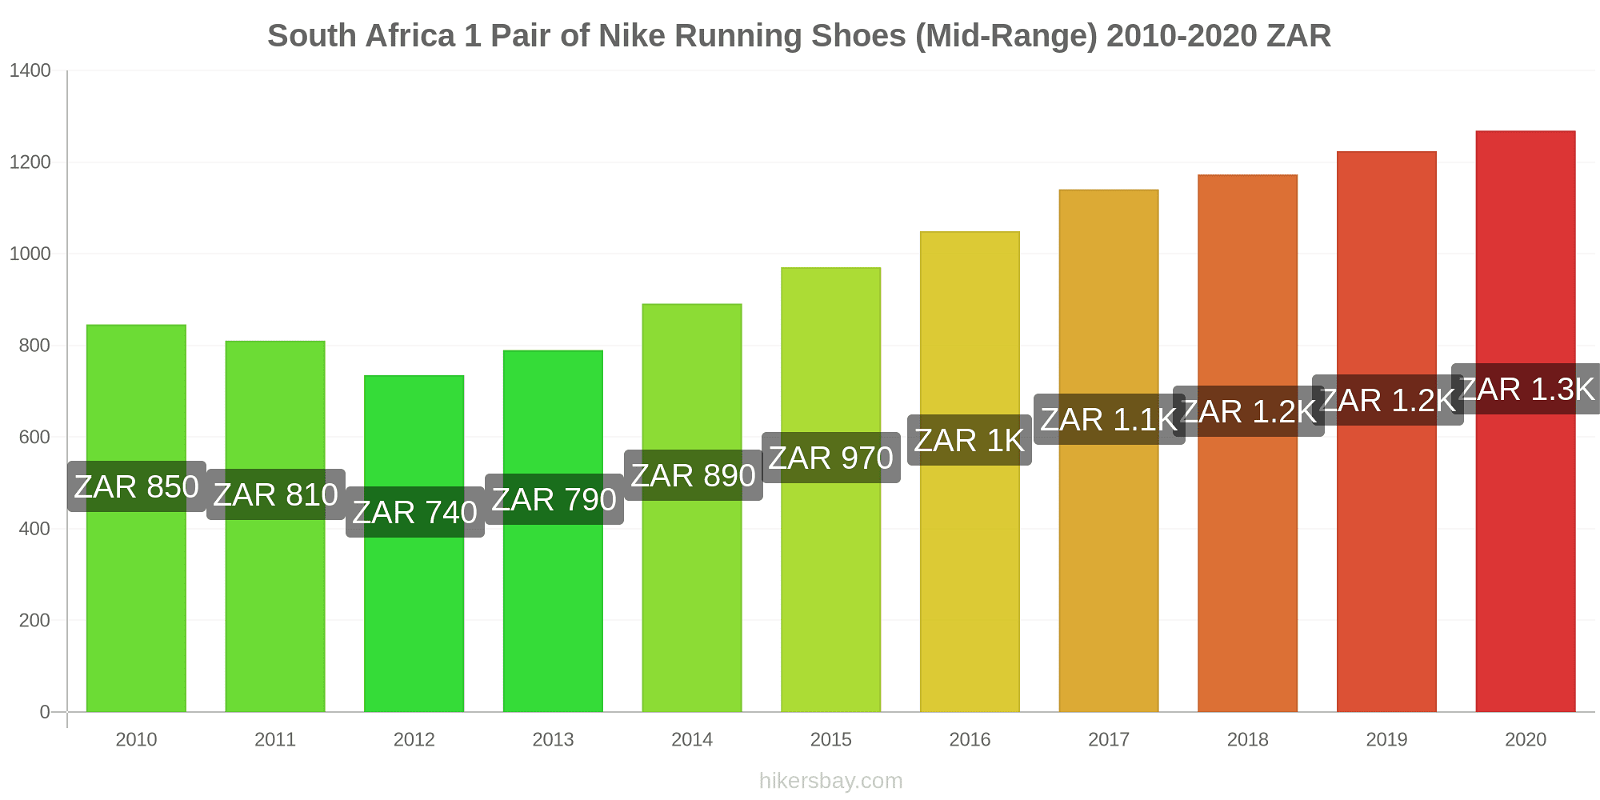 South Africa price changes 1 Pair of Nike Running Shoes (Mid-Range) hikersbay.com